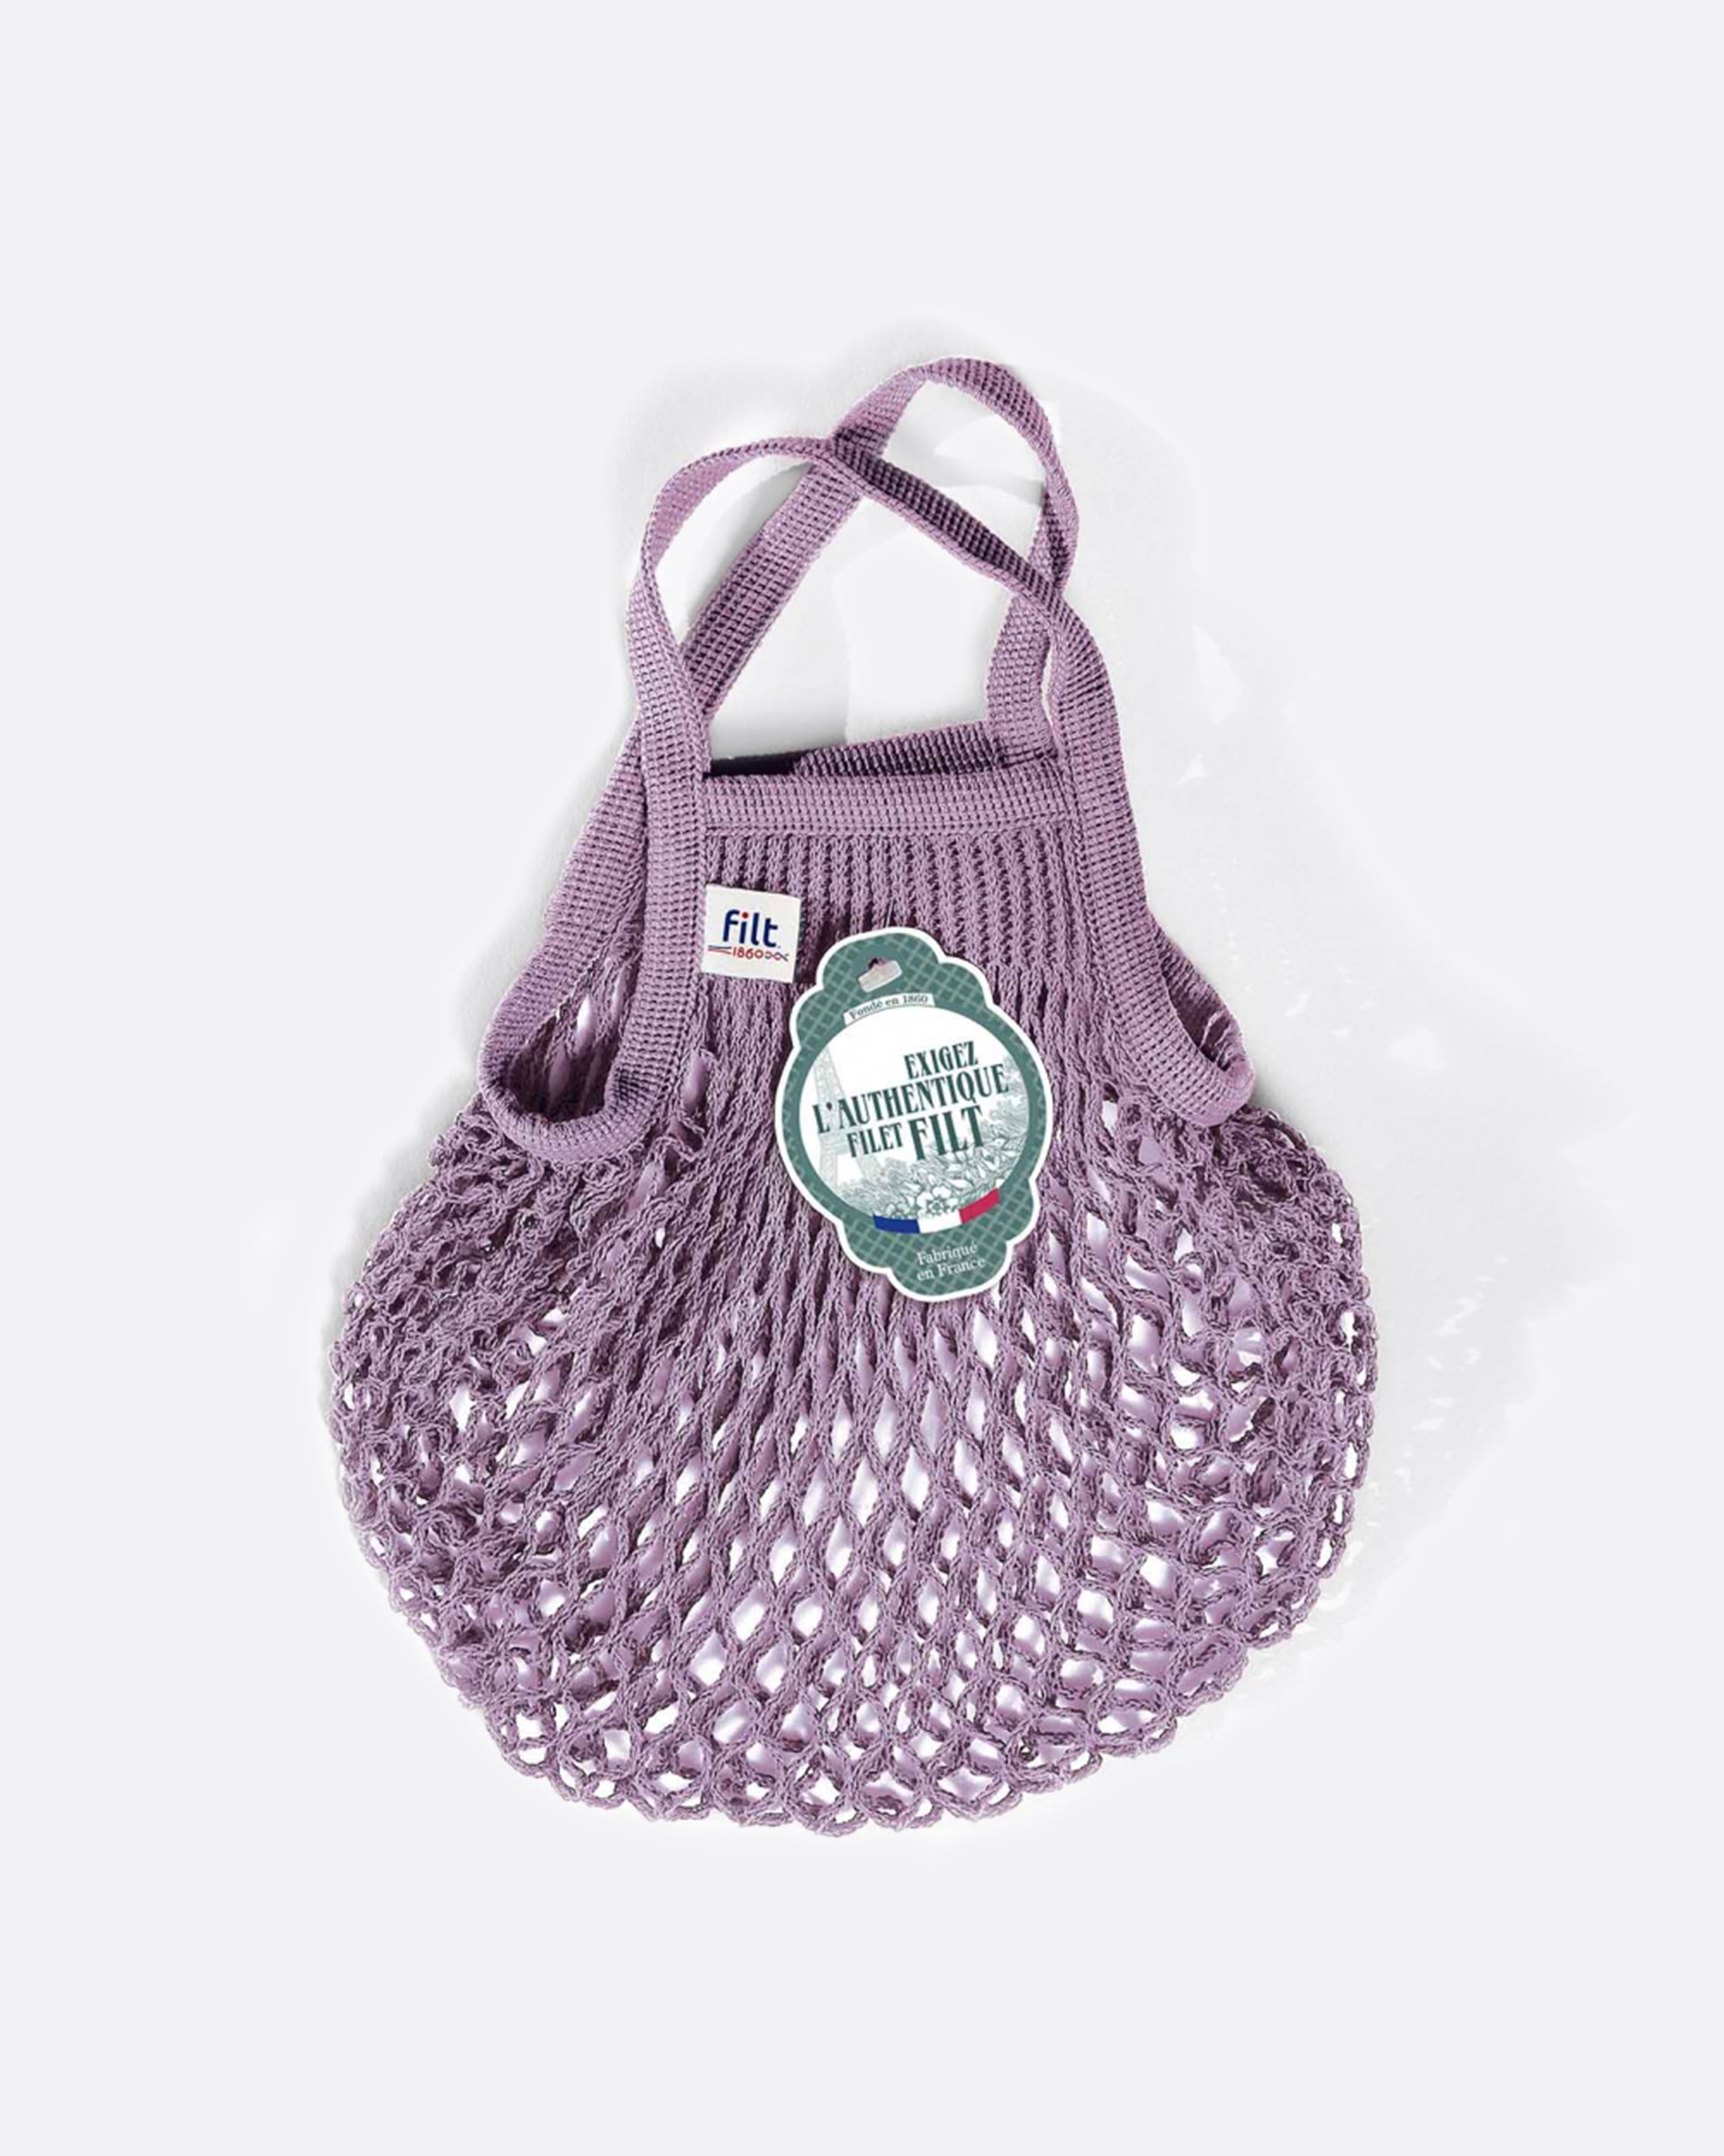 A little lilac purple bag, perfect for carrying snacks!